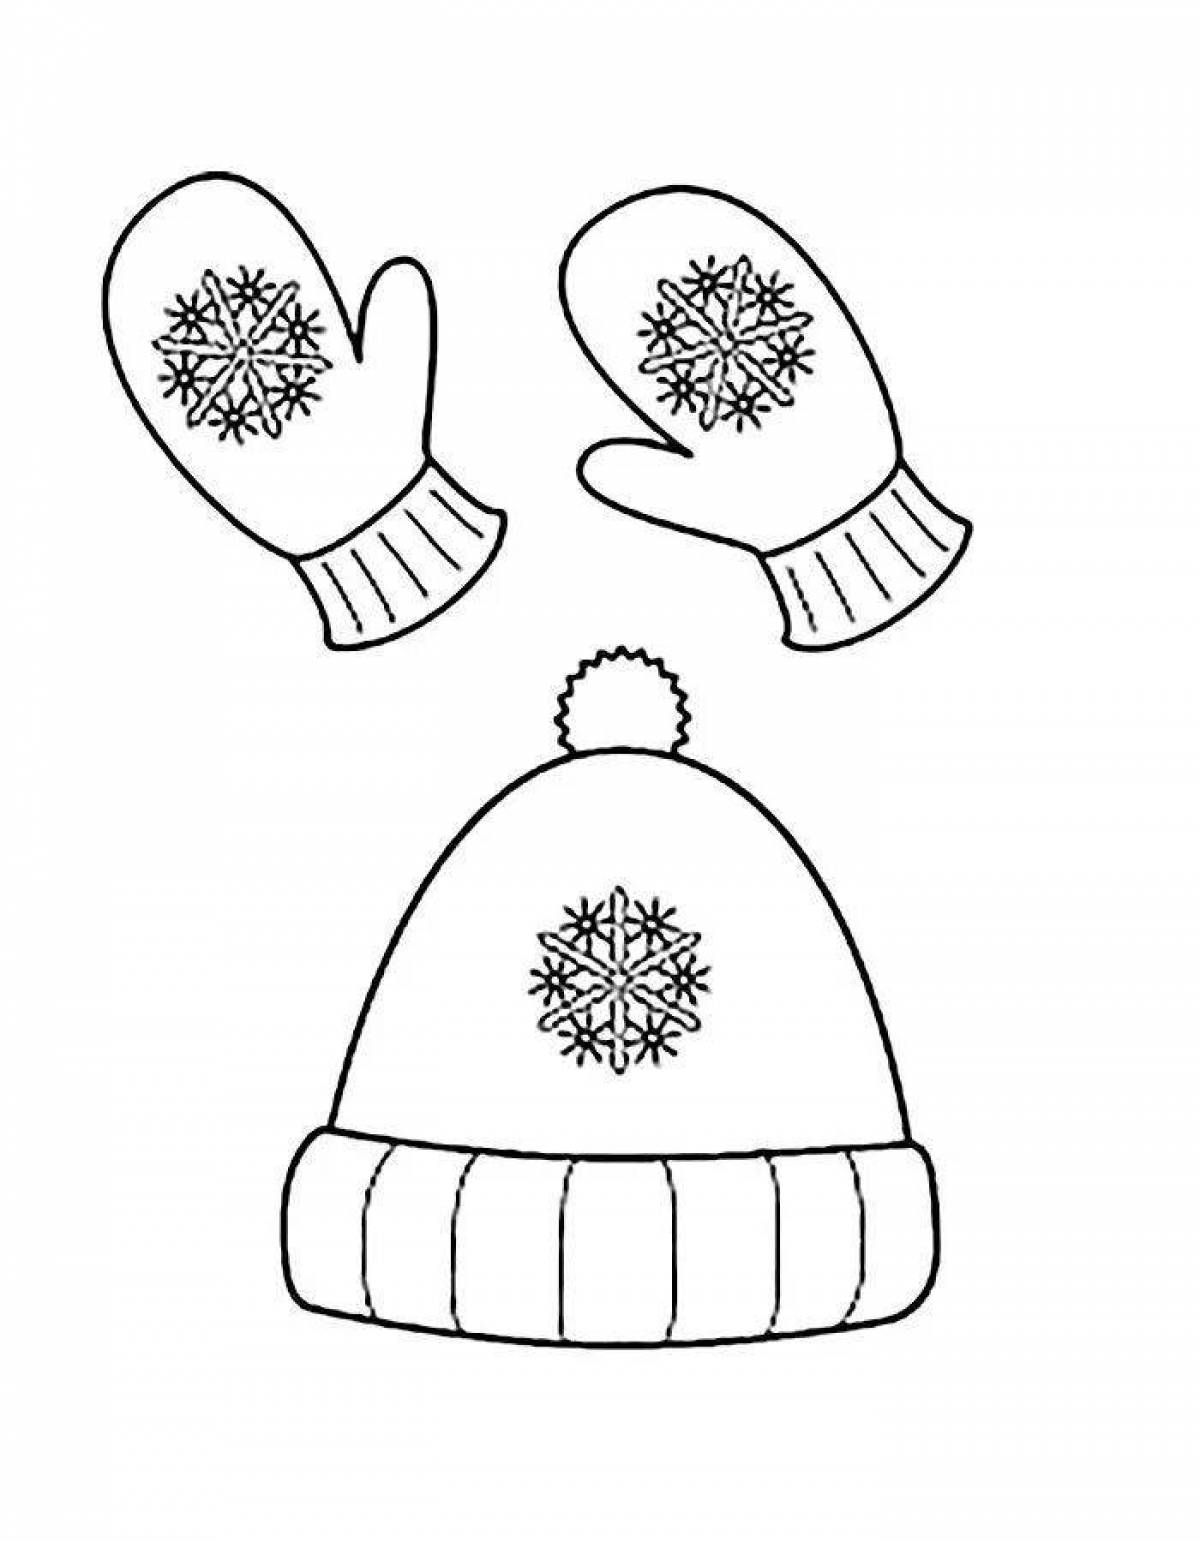 Coloring hat for children 2-3 years old